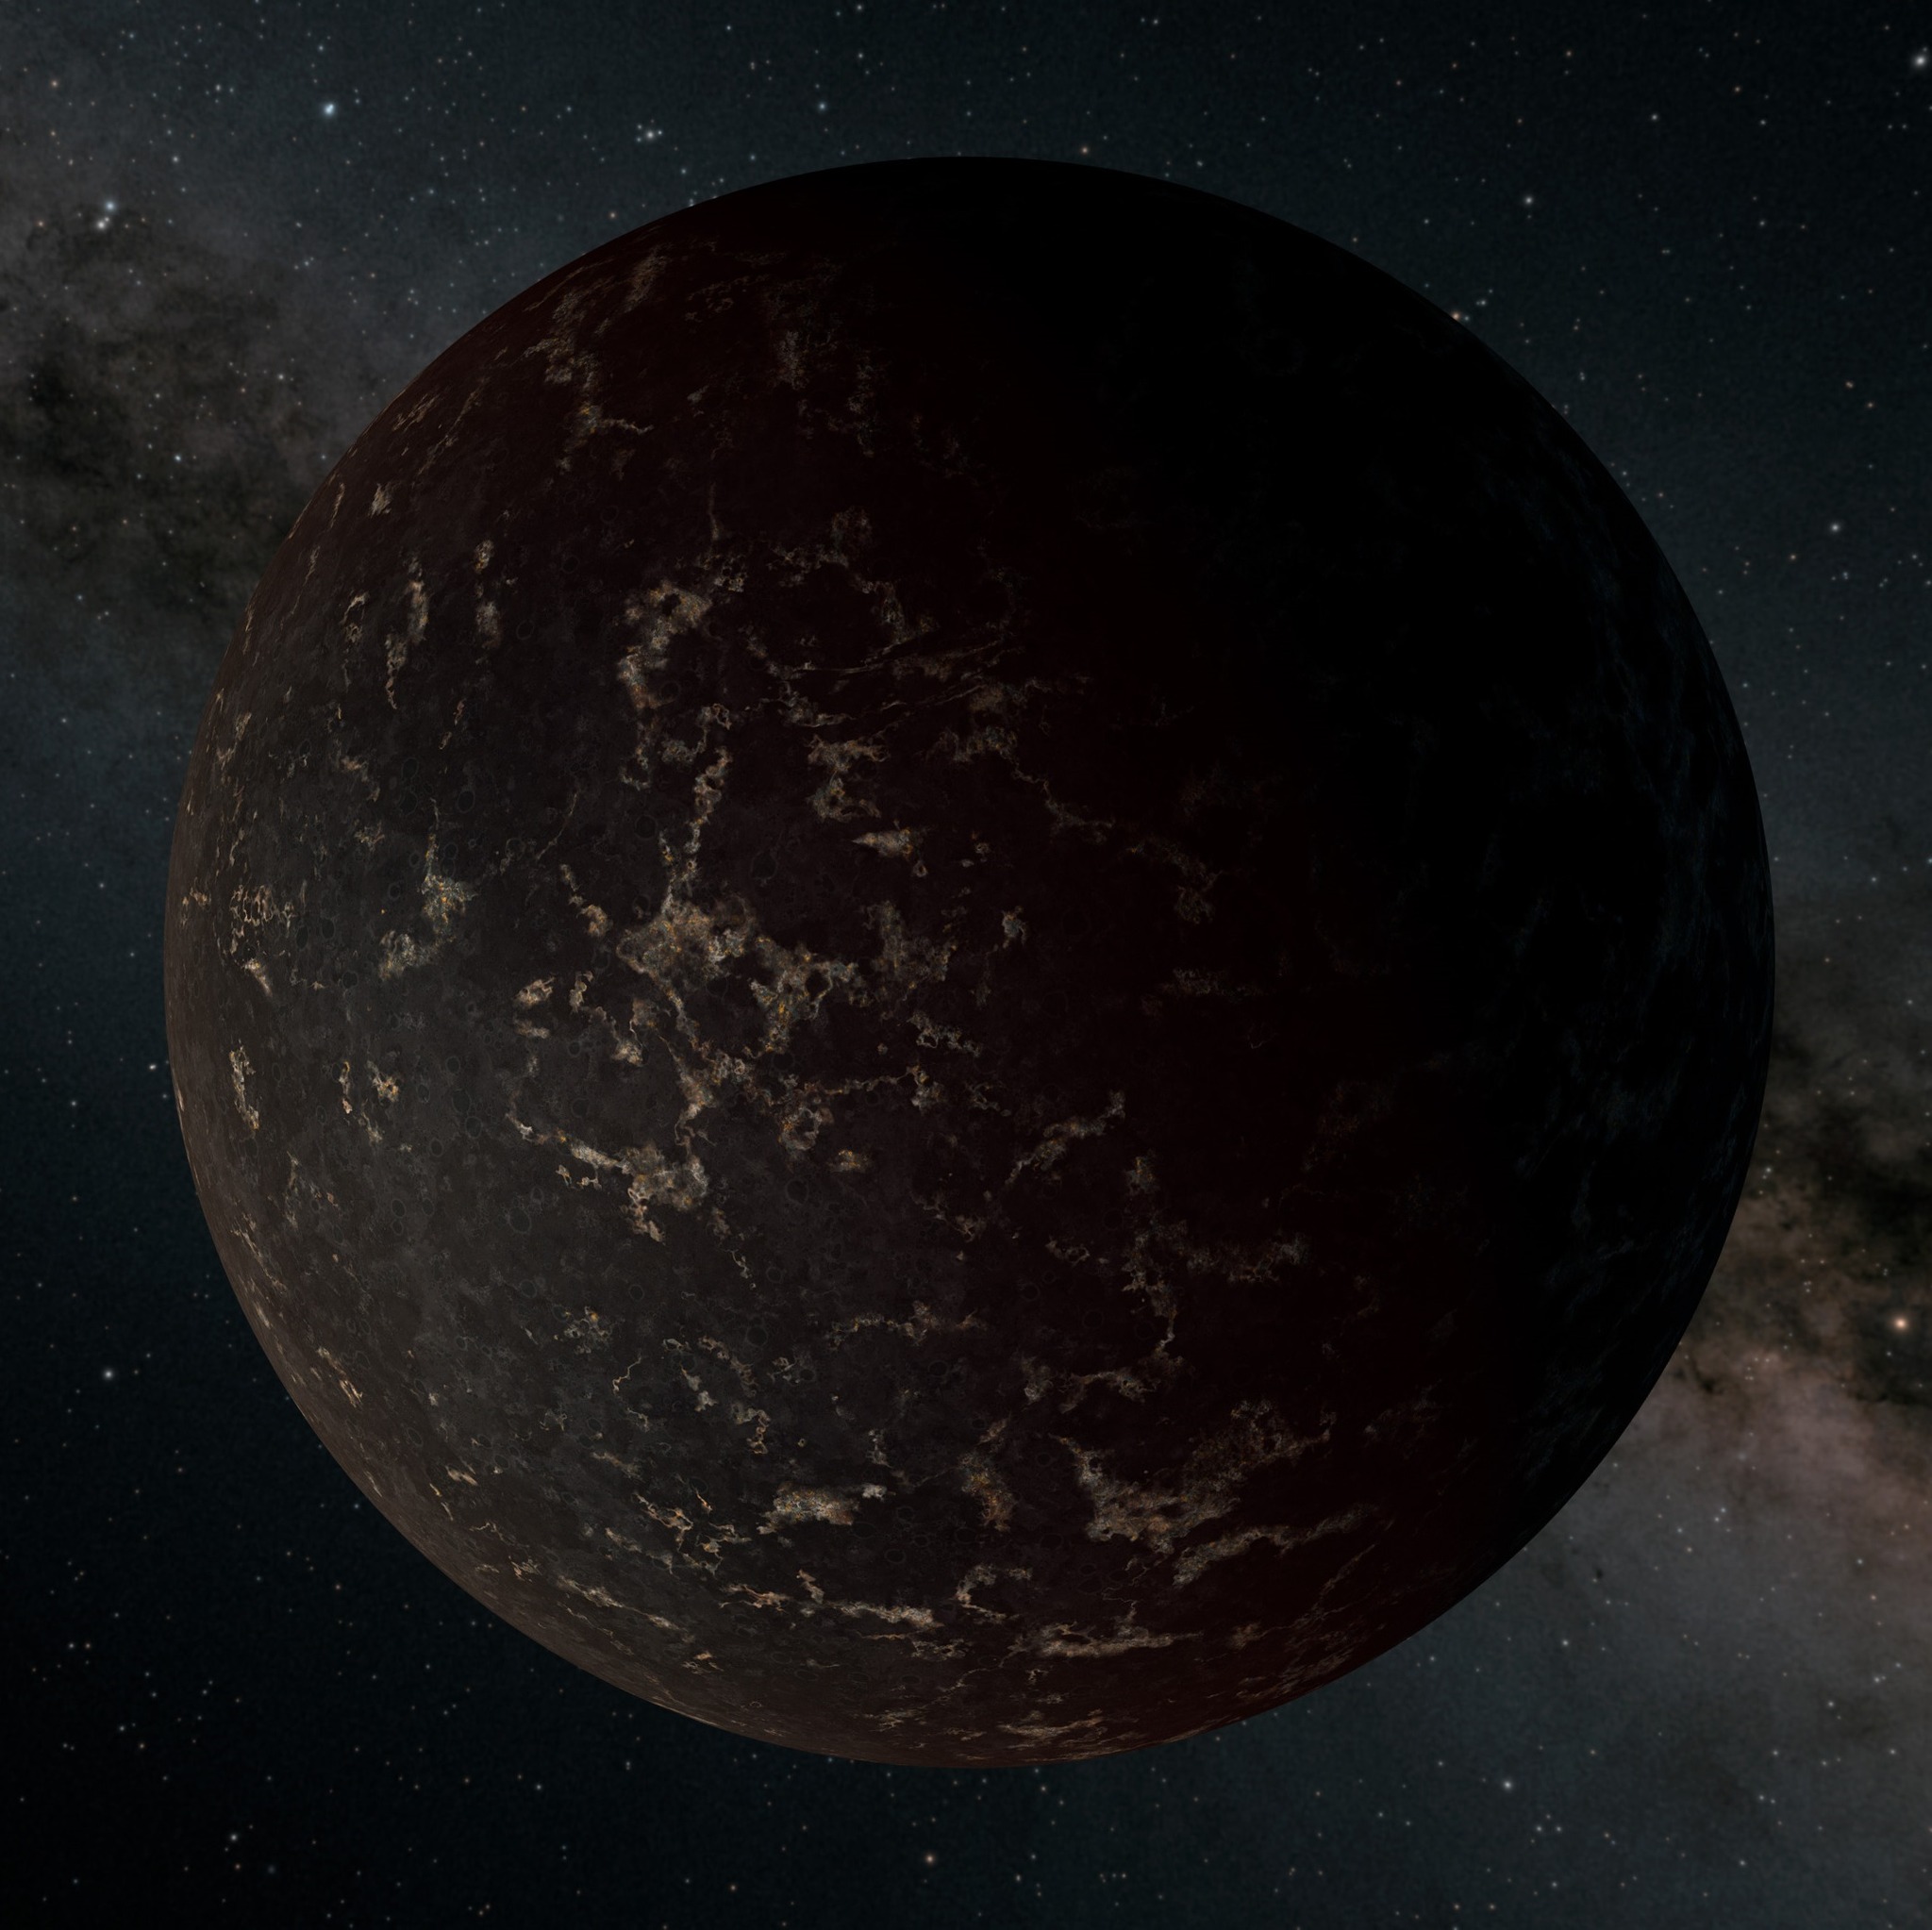 This illustration depicts the exoplanet LHS 3844b, which is around 1.3 times the mass of Earth and orbits an M dwarf star. The planet has no apparent atmosphere, and its surface may be covered mostly in dark lava rock, according to observations by Spitzer Space Telescope.                                          Image credit: NASA/JPL-Caltech